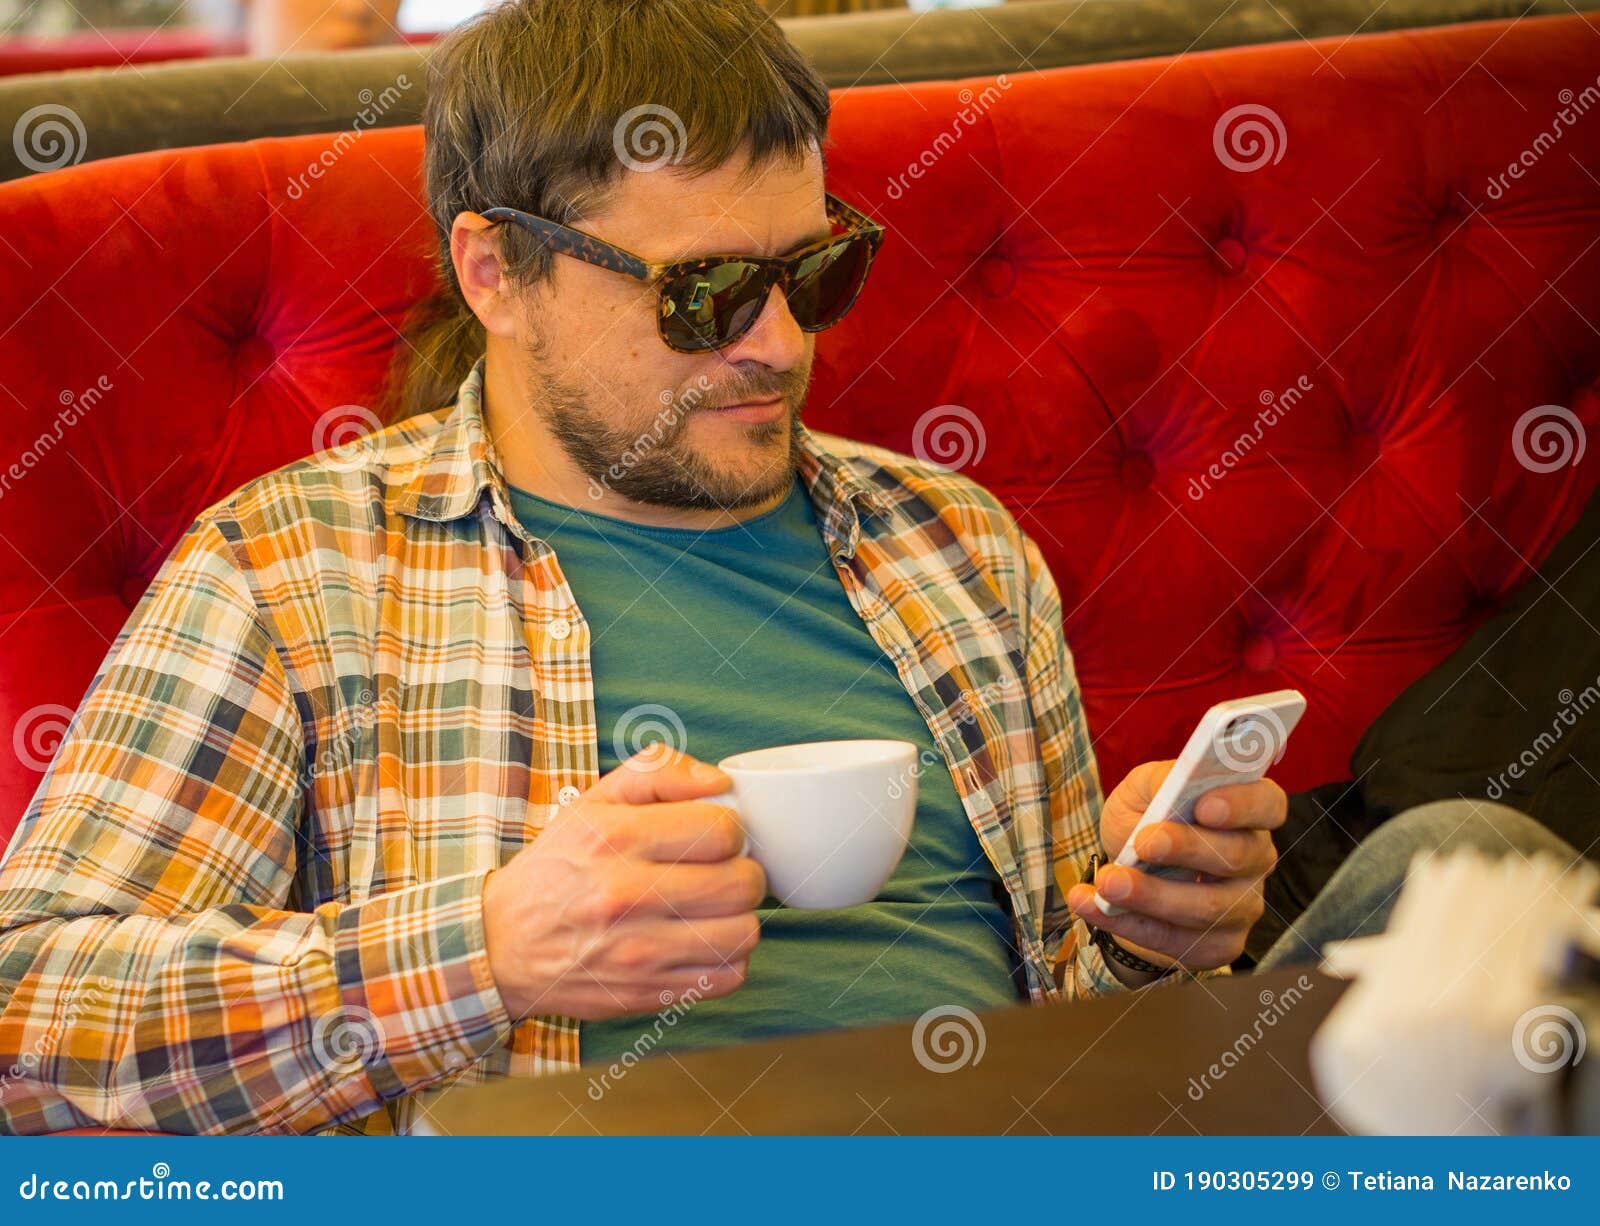 middle age man lifestyle, guy at cafe